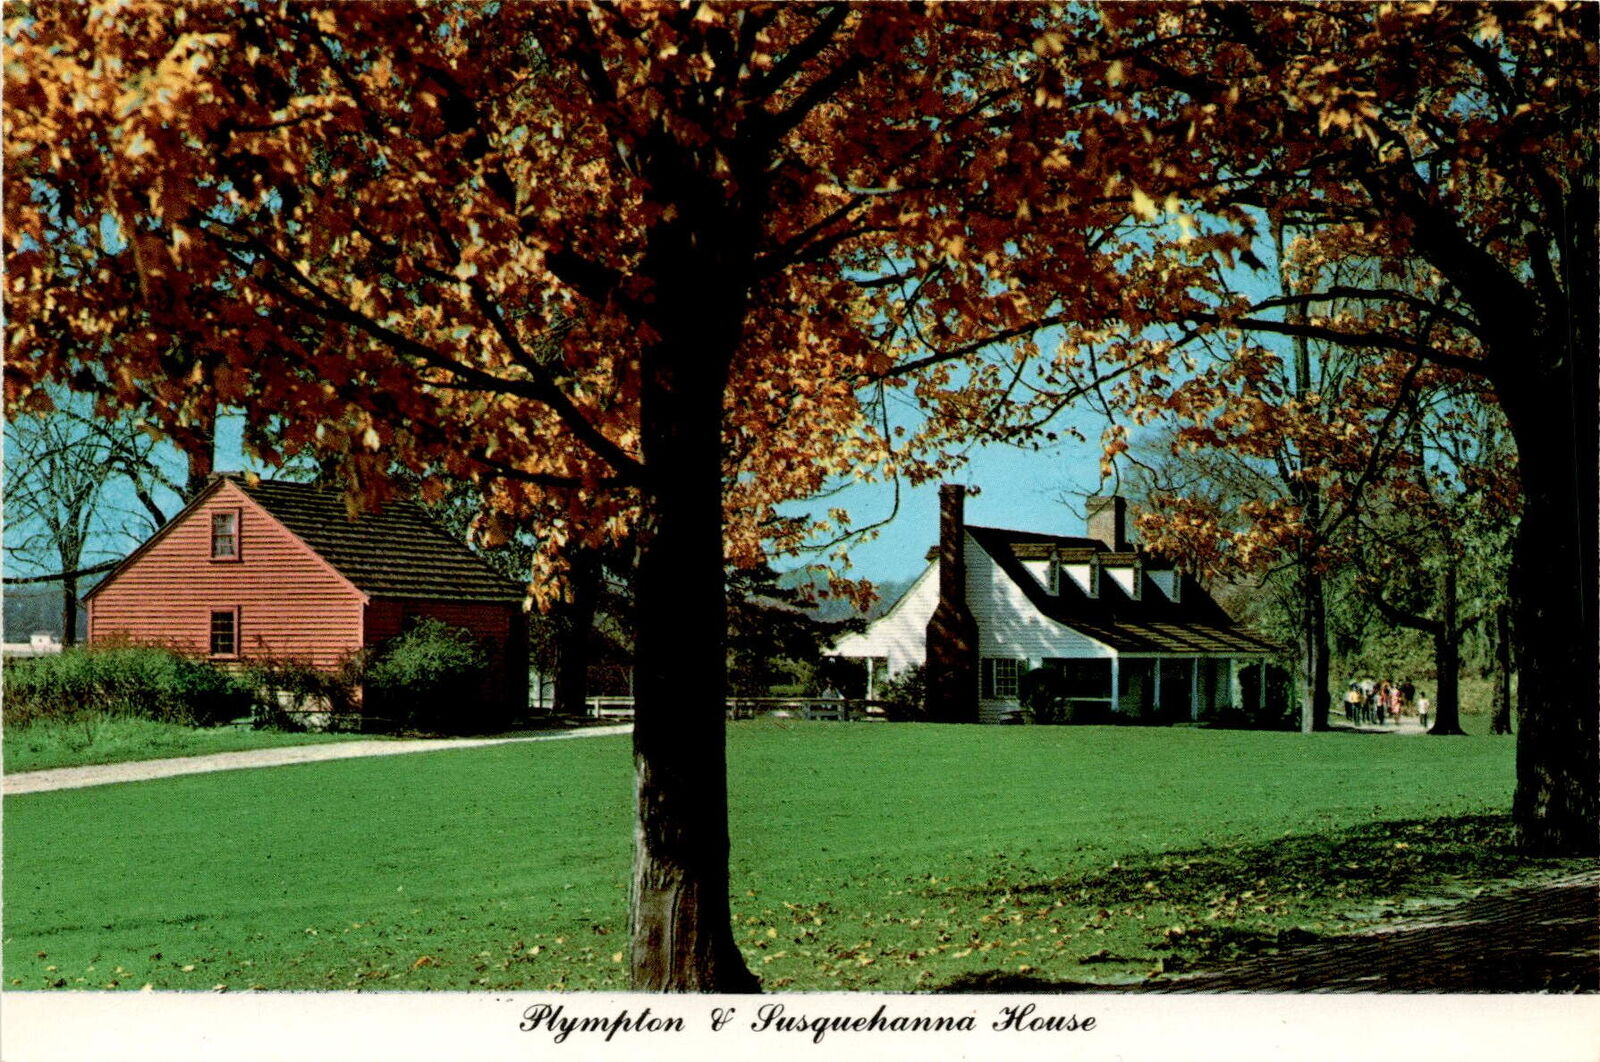 Vintage postcard of Plympton House and Susquehanna House